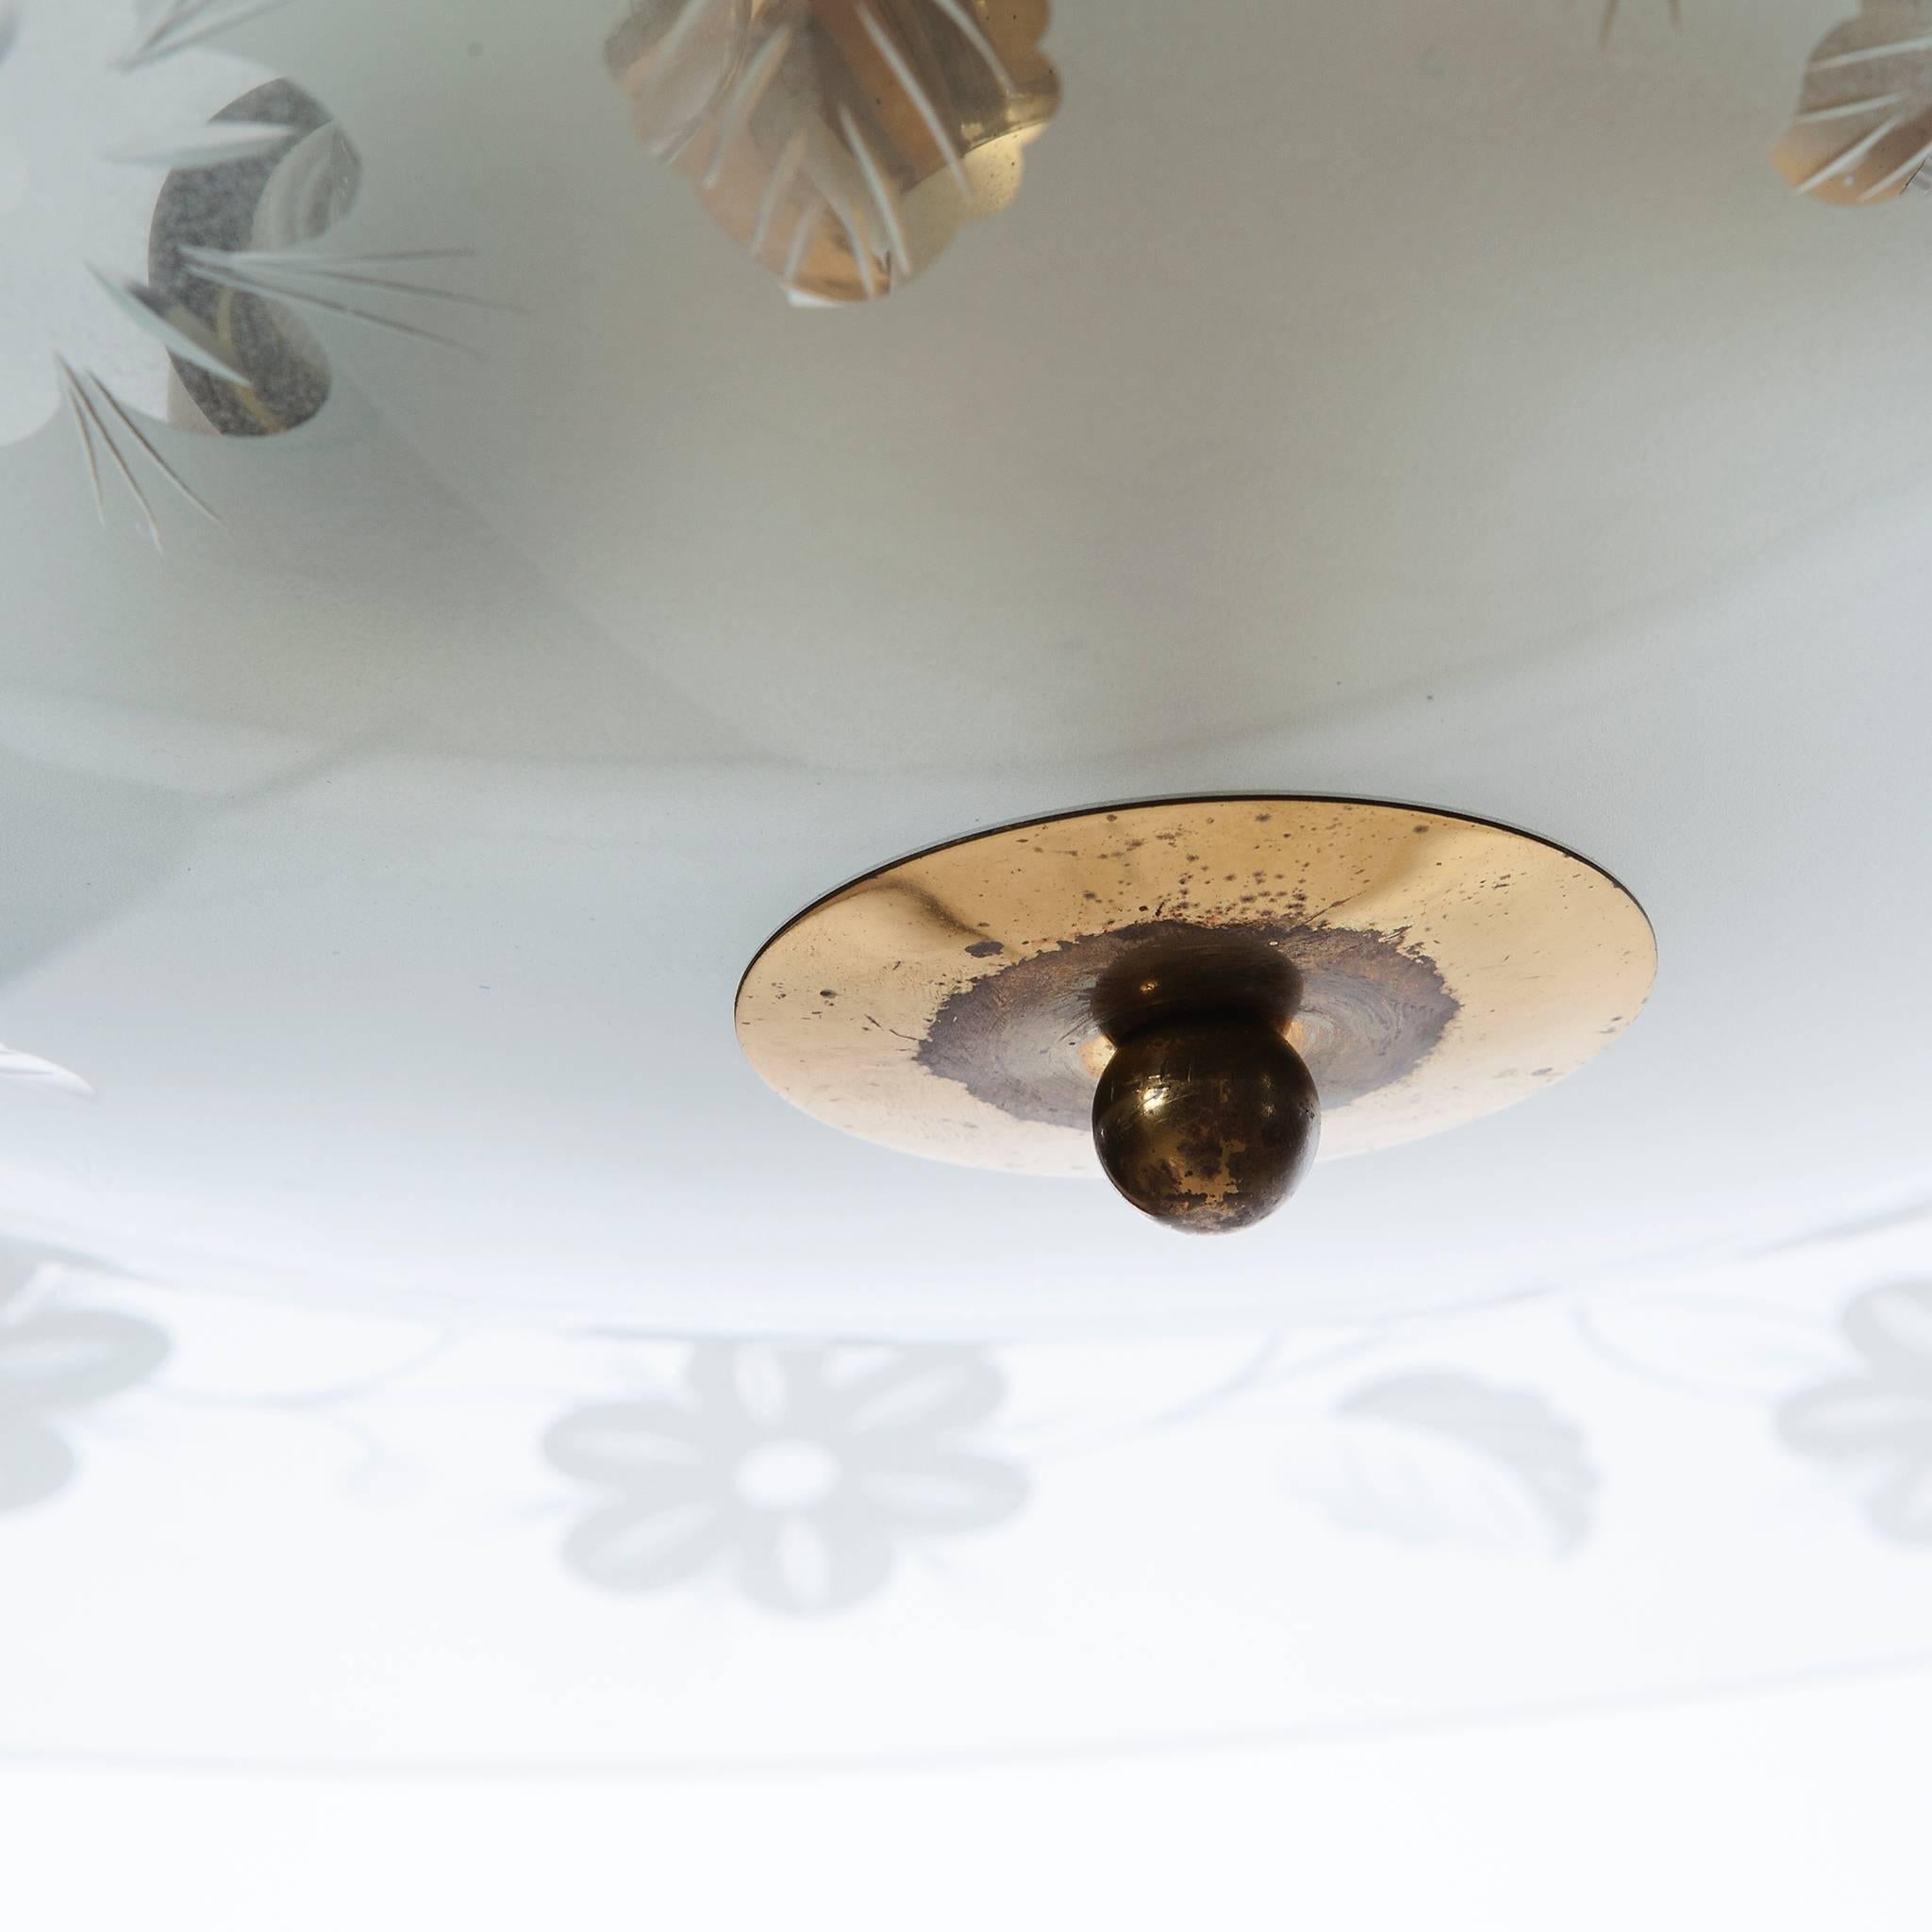 This elegant light consisting of a brass frame with 2 unique glass reflector/saucers. 
The lower round curved glass reflector with floral patterns mounts below a larger round etched & clear glass reflector. A beautiful, brass ring to connect the